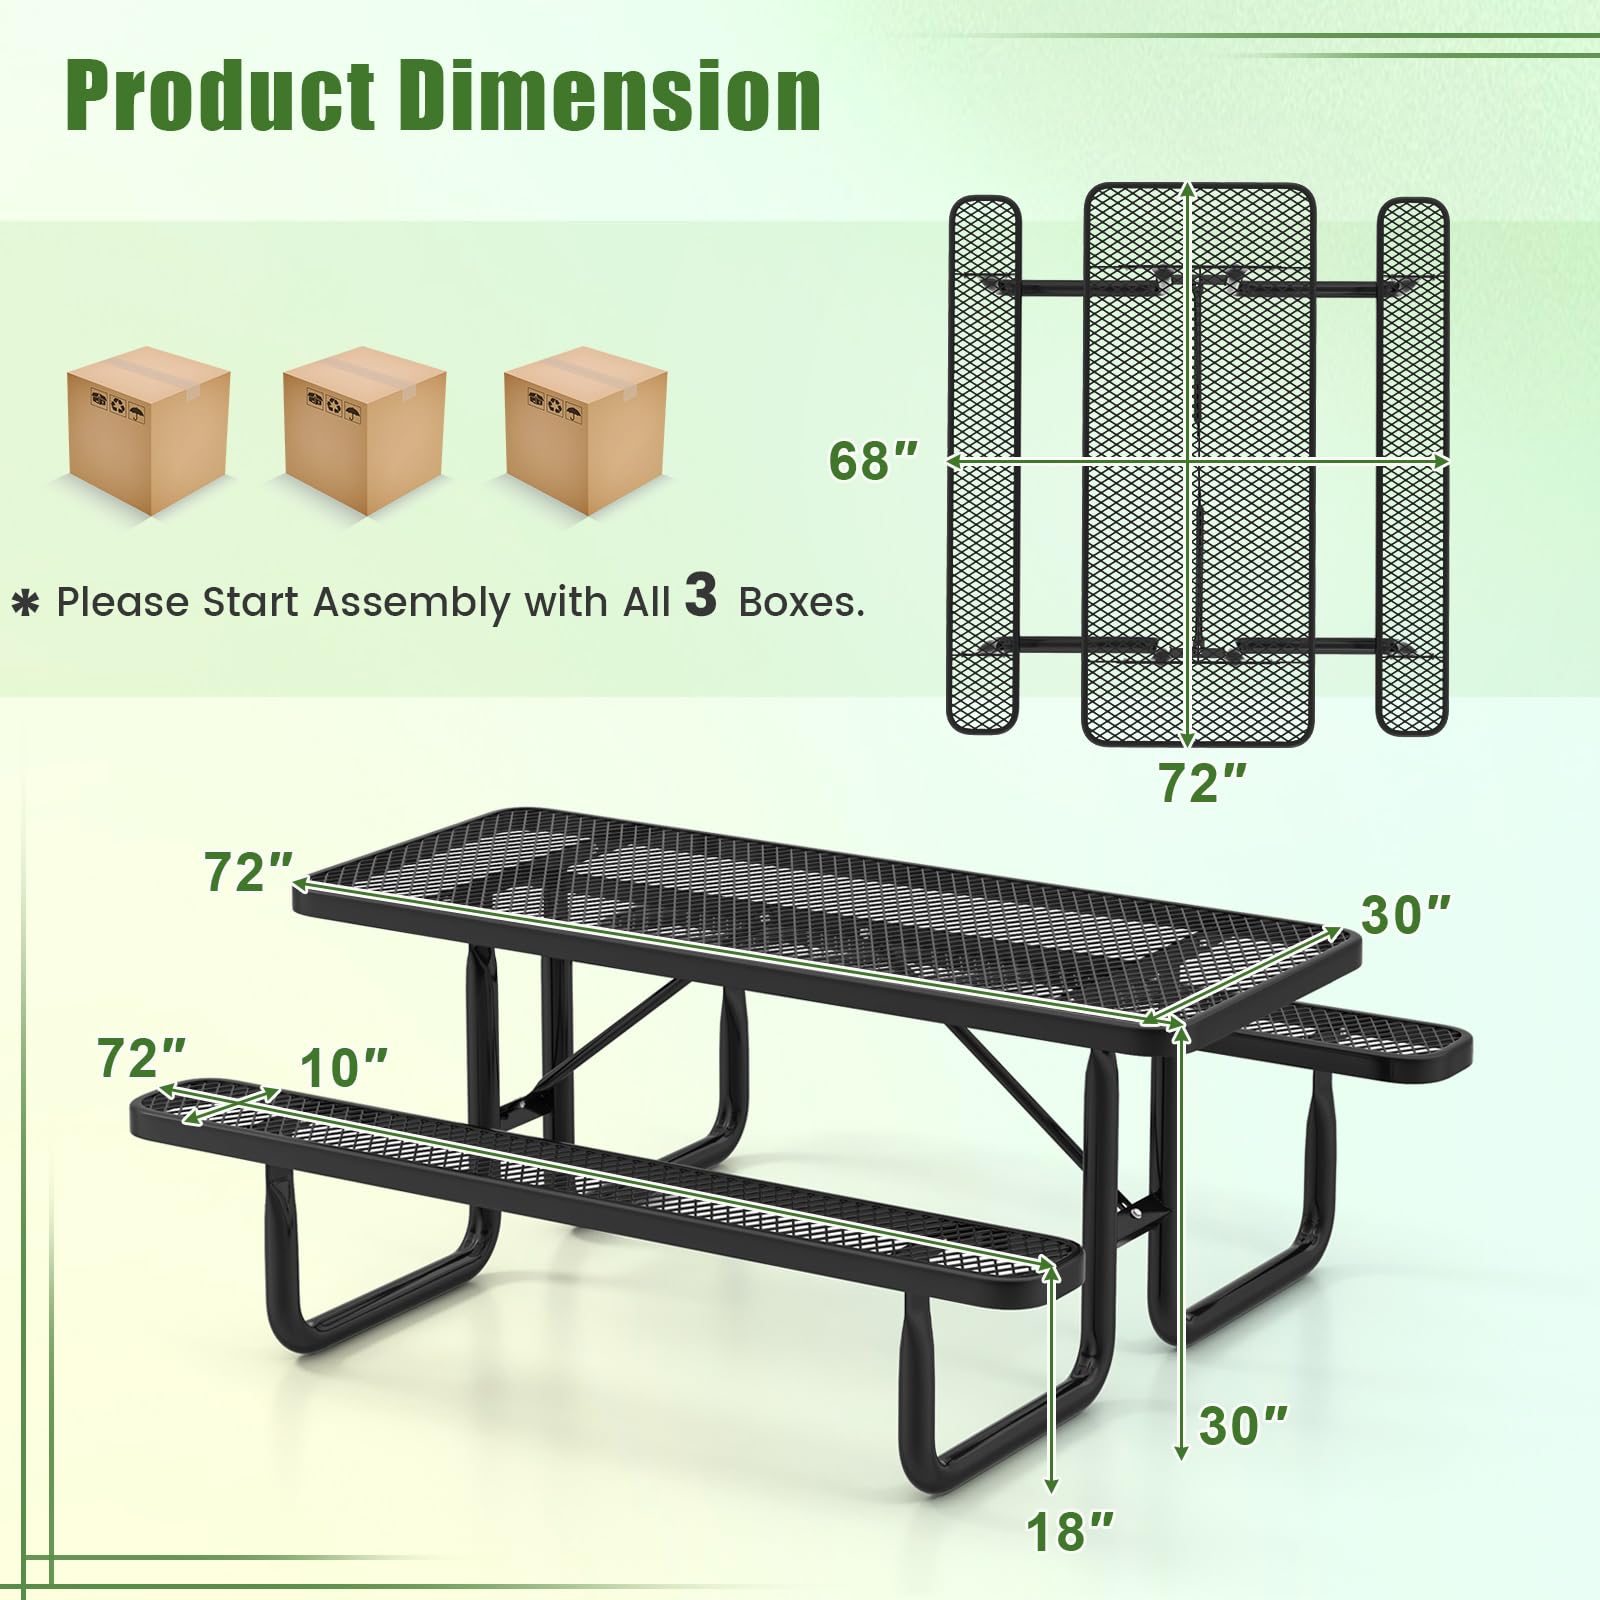 Giantex 72” Picnic Table, Large Outdoor Table & Bench Set for 8